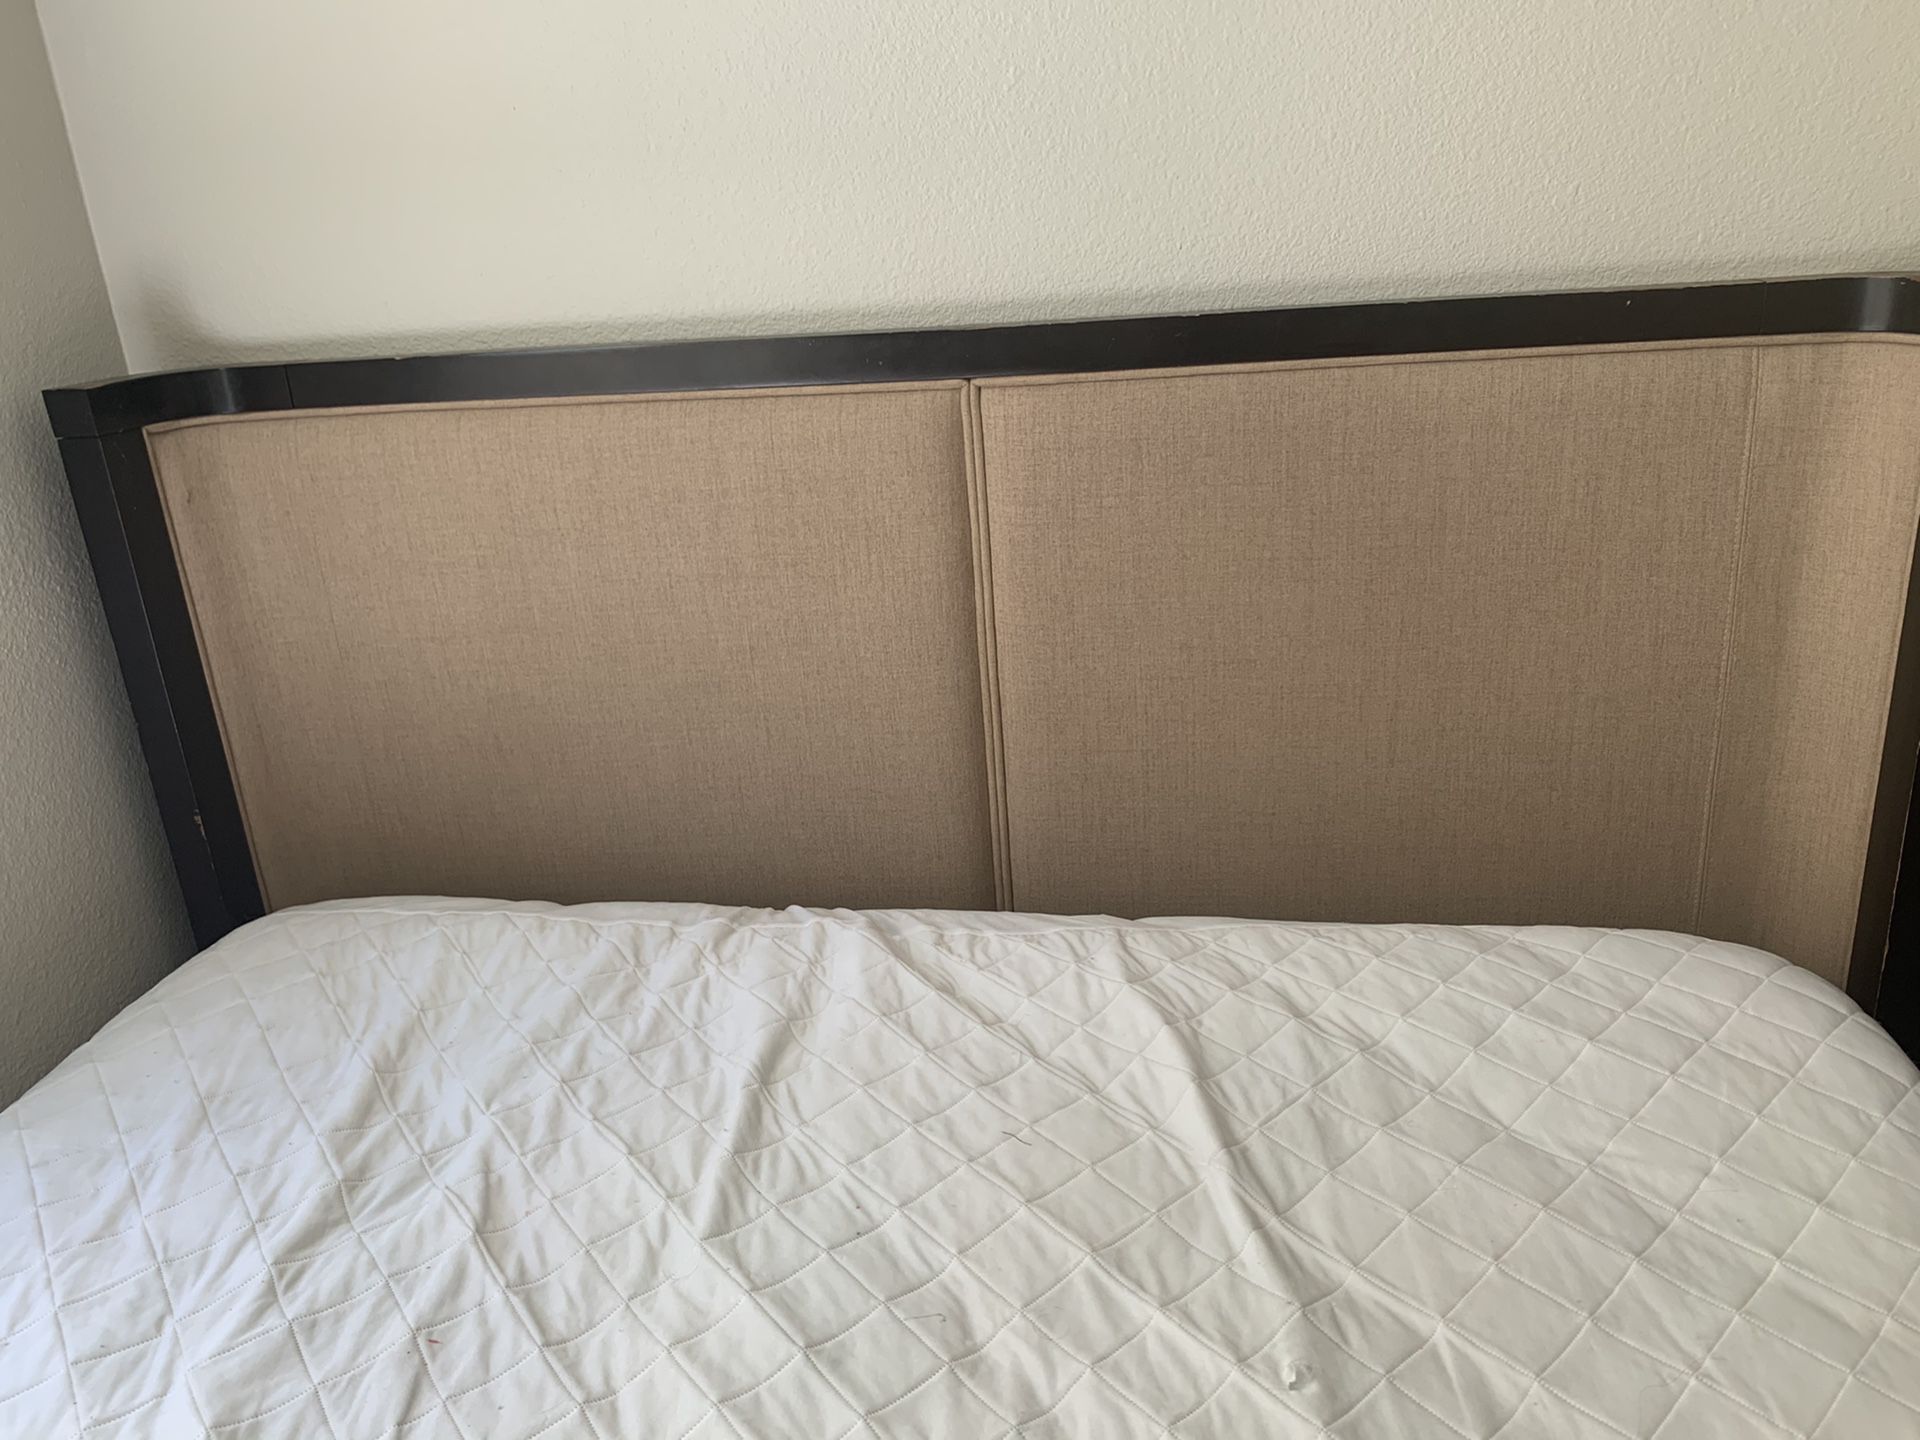 wood queen bed frame with headboard Good Condition.